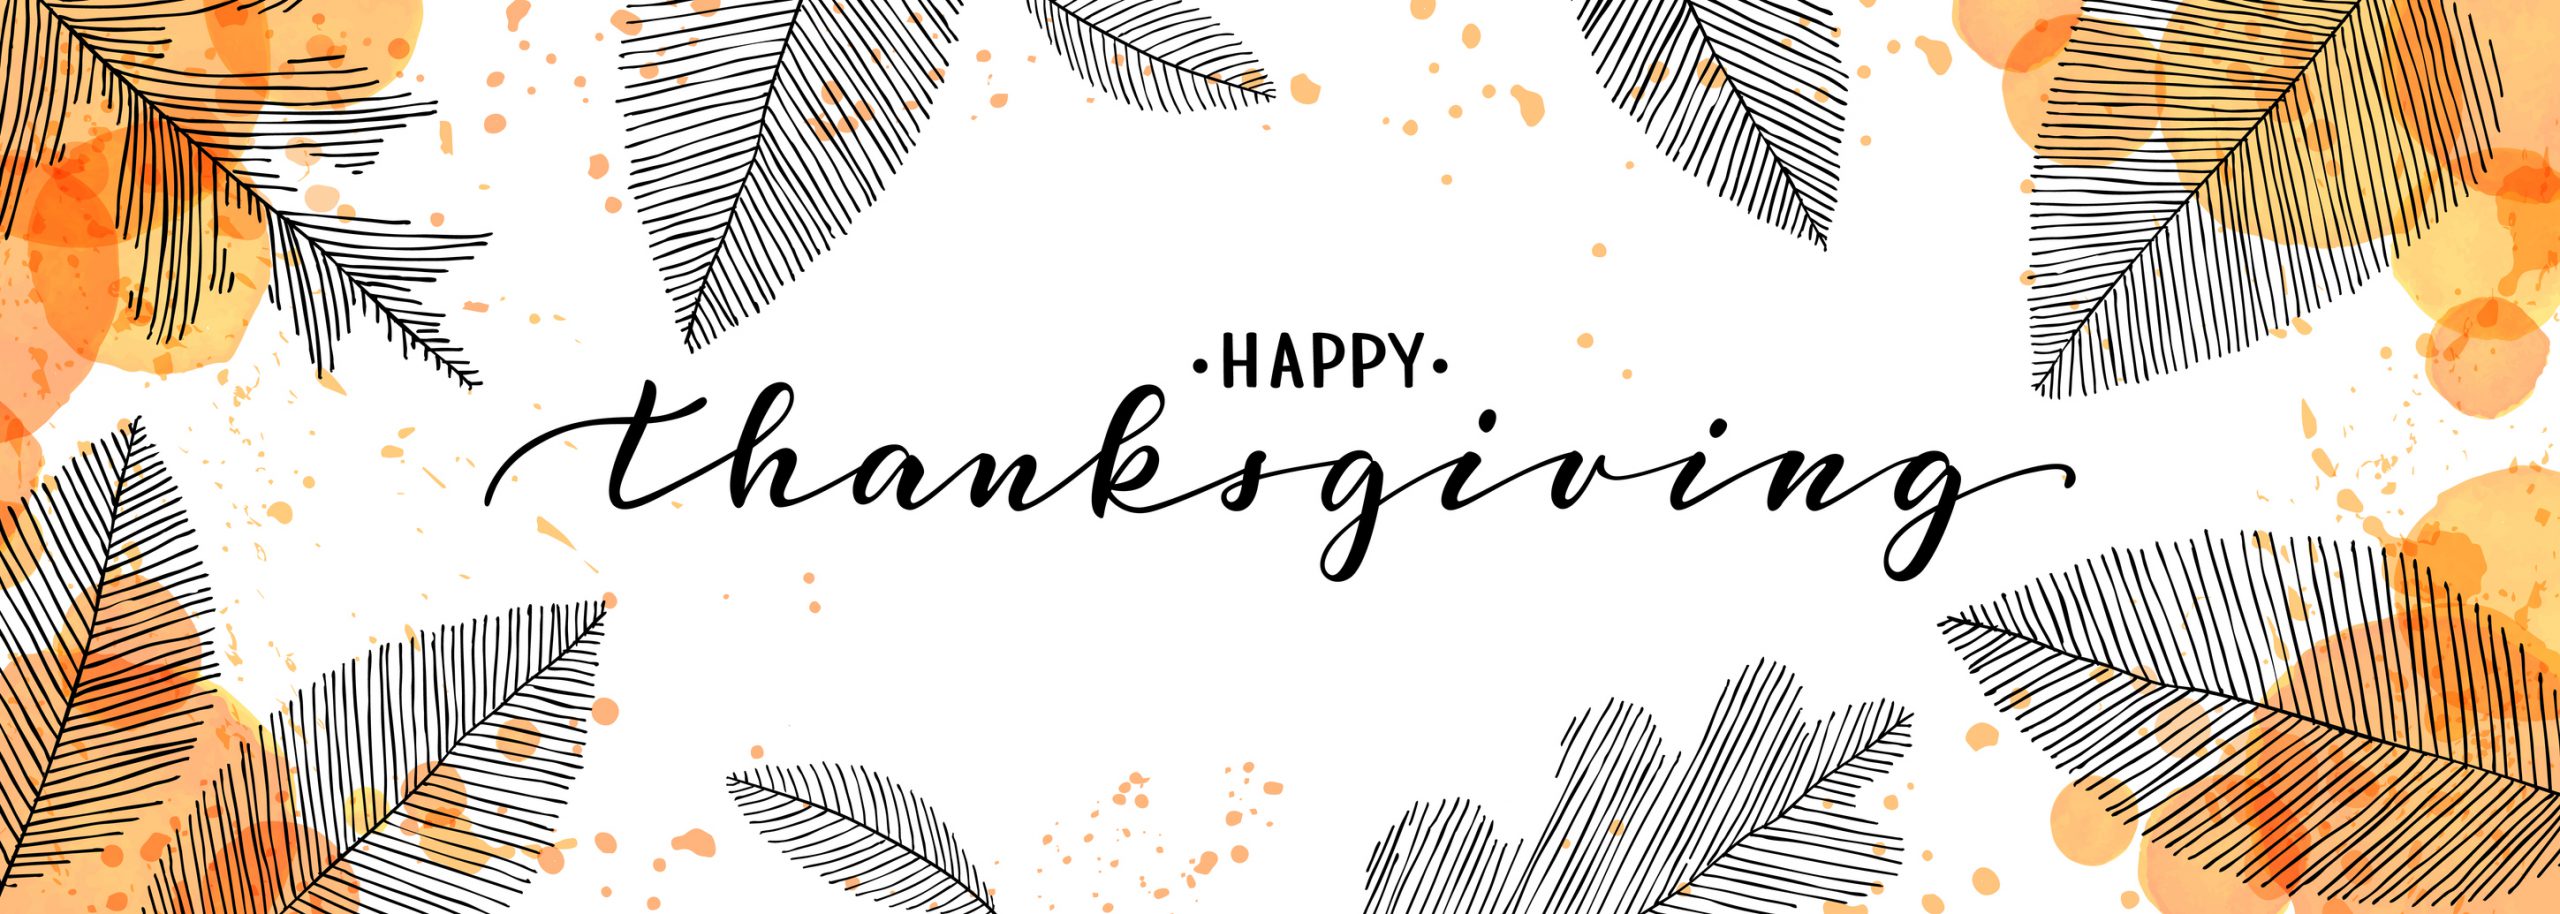 happy thanksgiving brush pen lettering. watercolor splash and linear leaves background. design holiday greeting card and invitation of seasonal american and canadian autumn holiday.